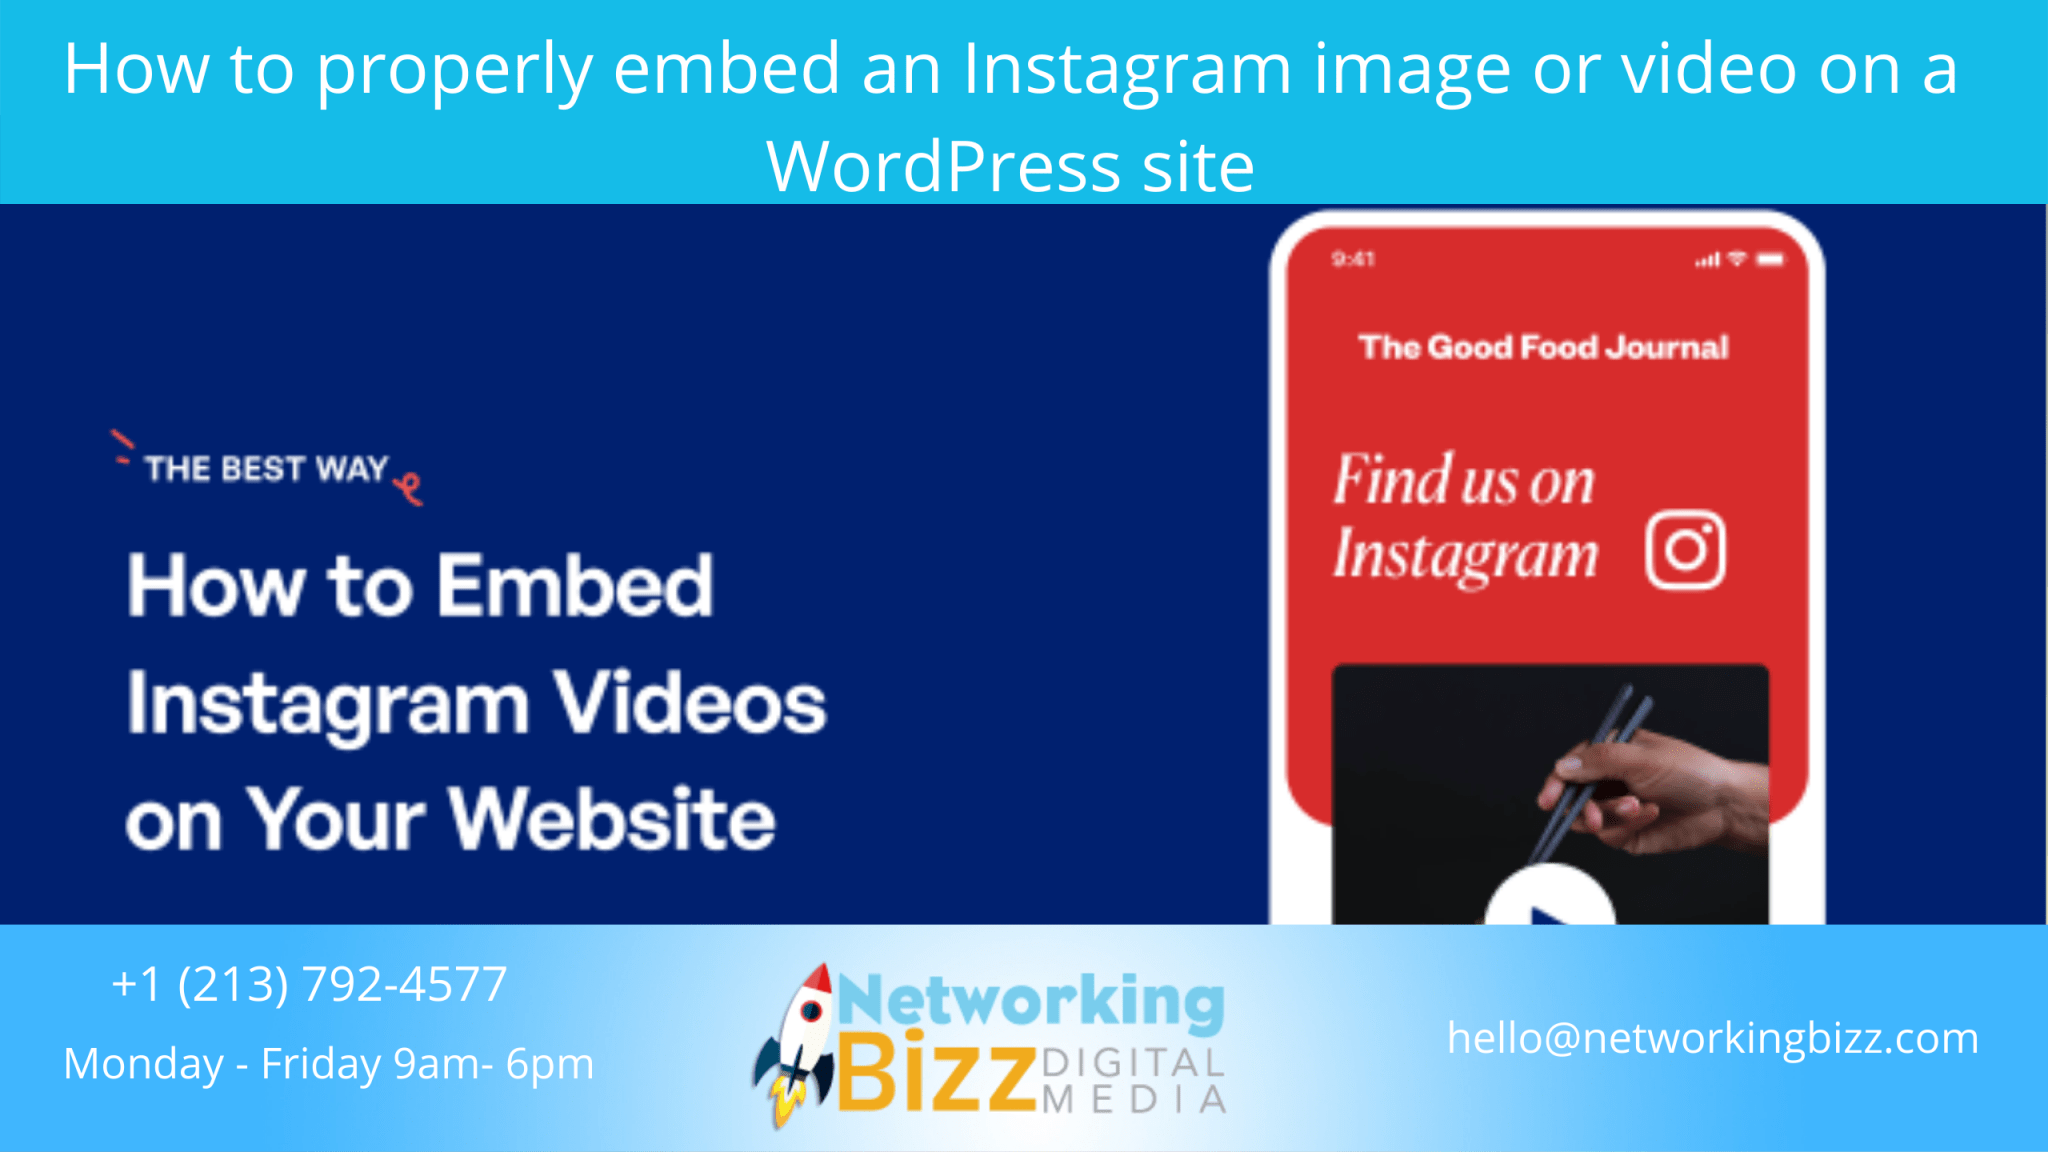 How to properly embed an Instagram image or video on a WordPress site